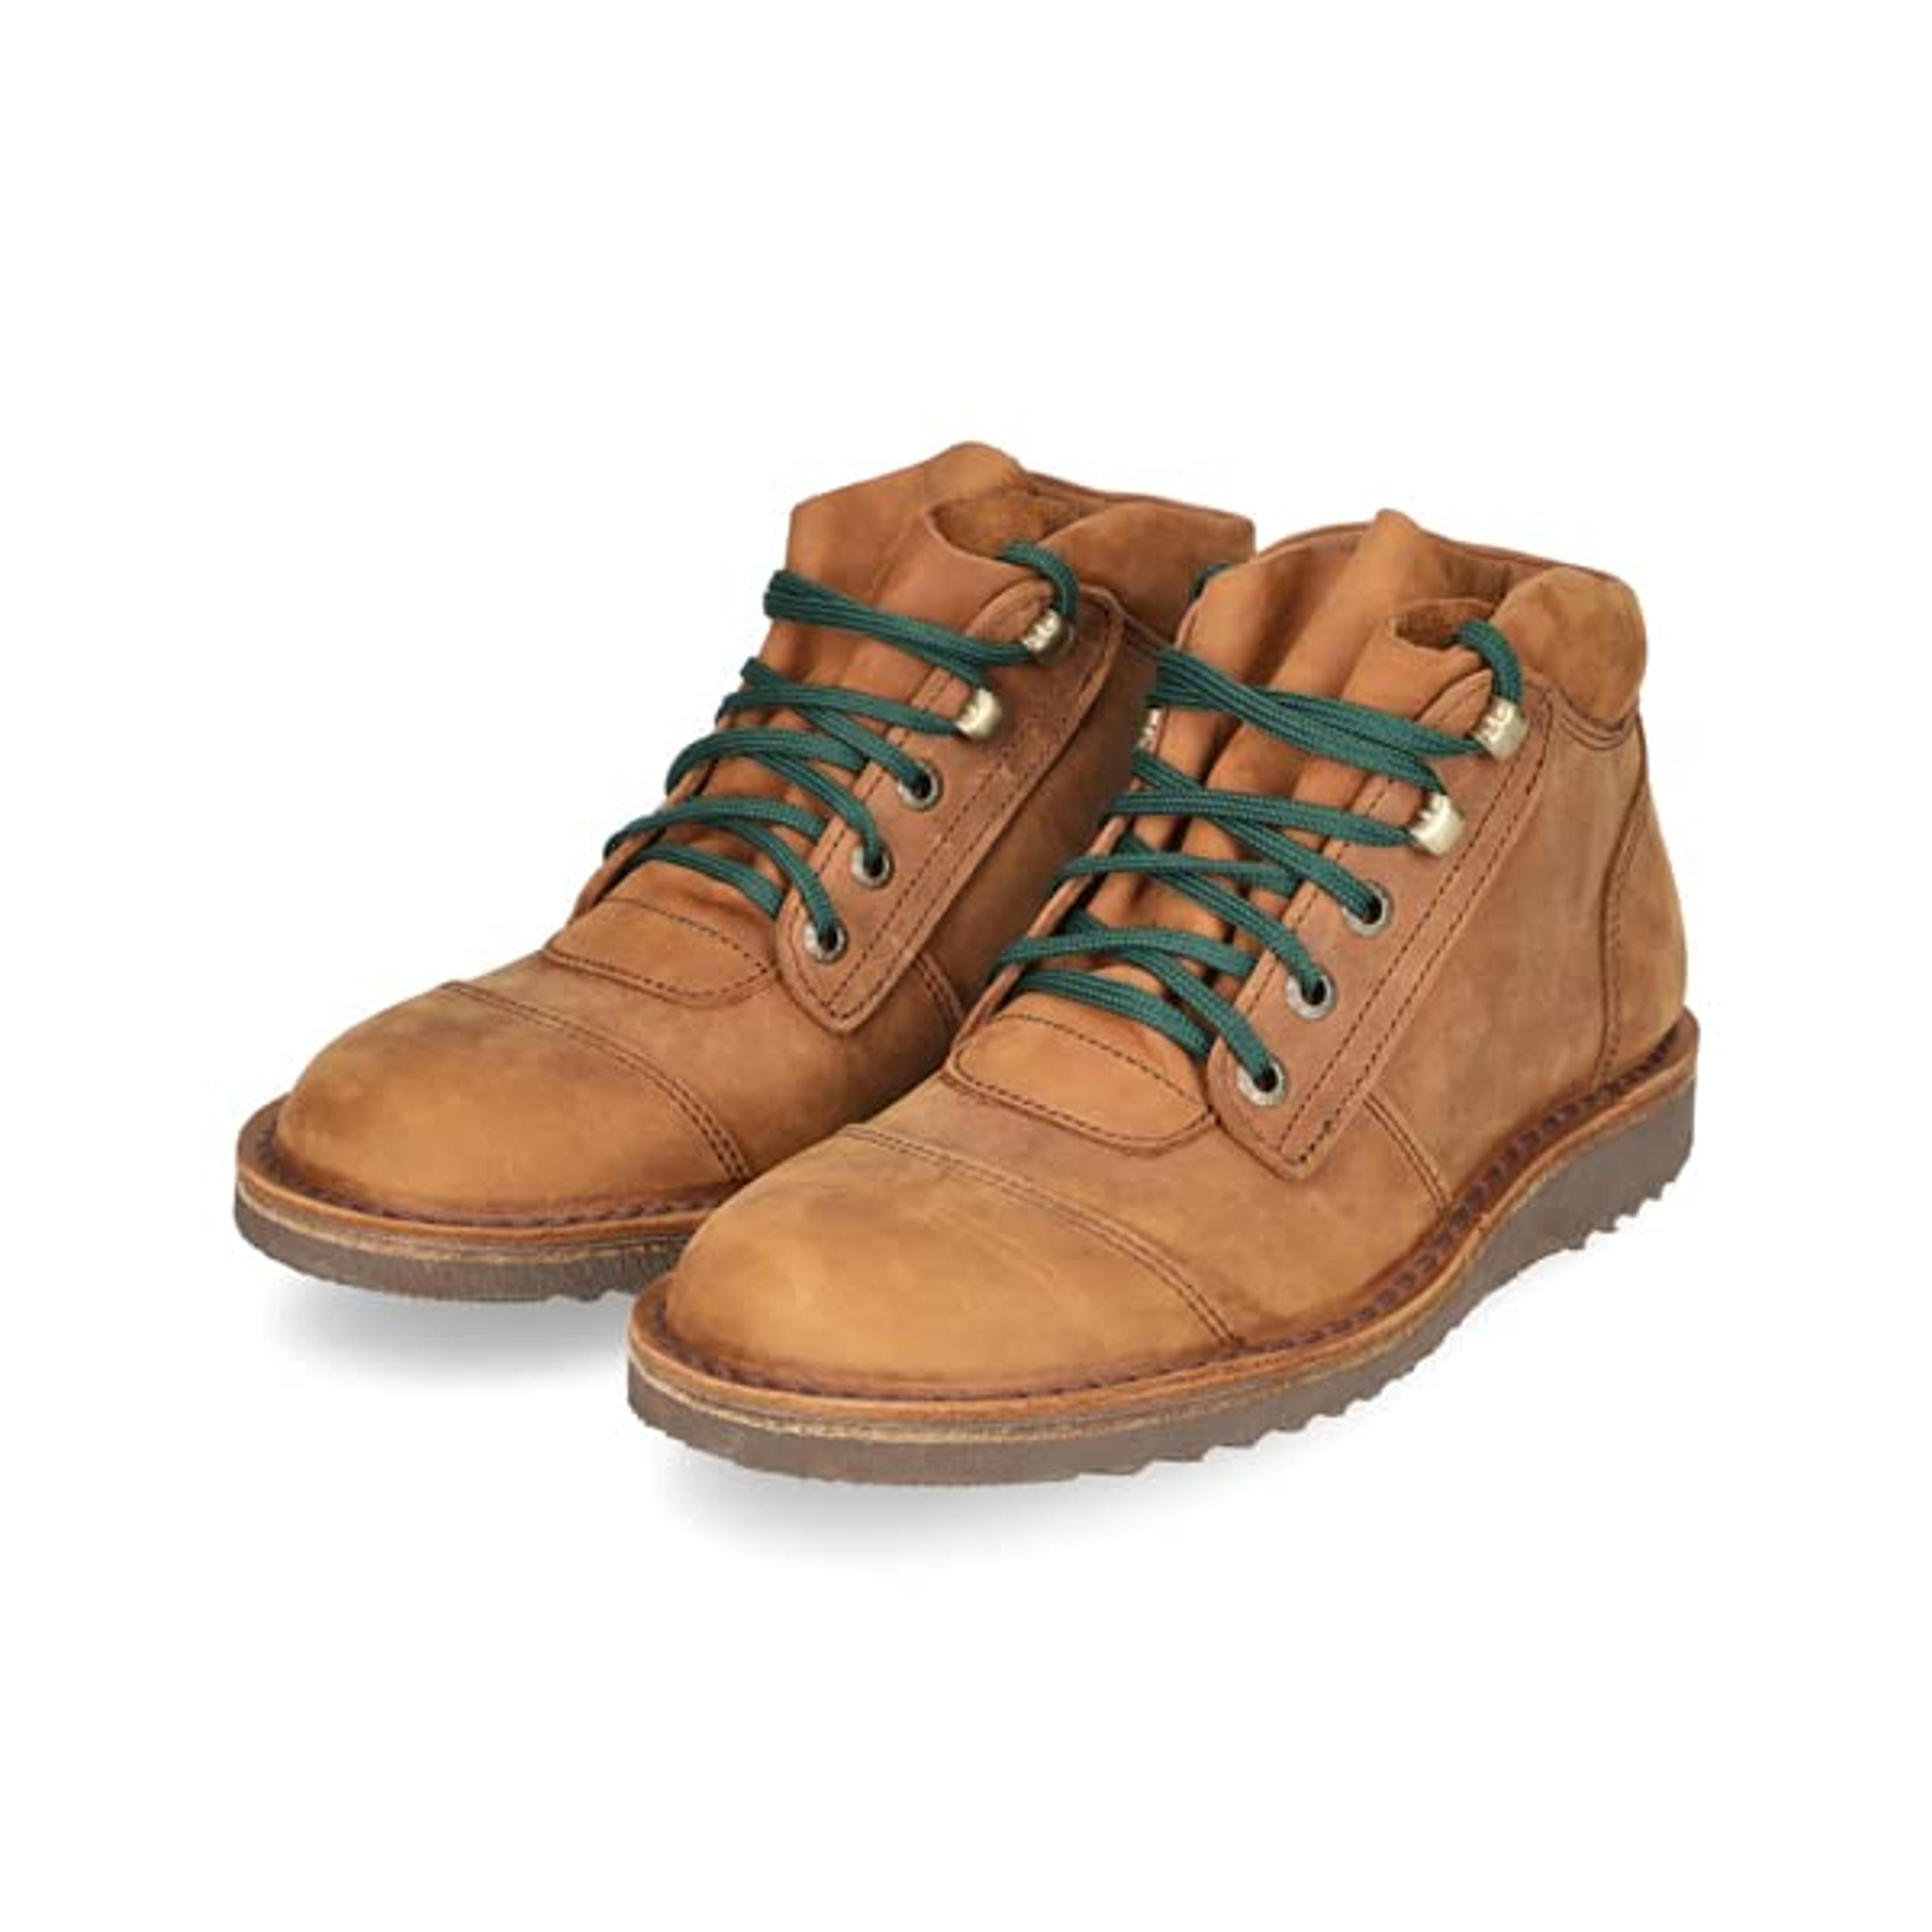 Amazon.com: JIM GREEN Men's African Ranger Boots Lace-Up Water Resistant Full Grain Leather Work or Hiking Boot (Fudge, 9.5) : Everything Else